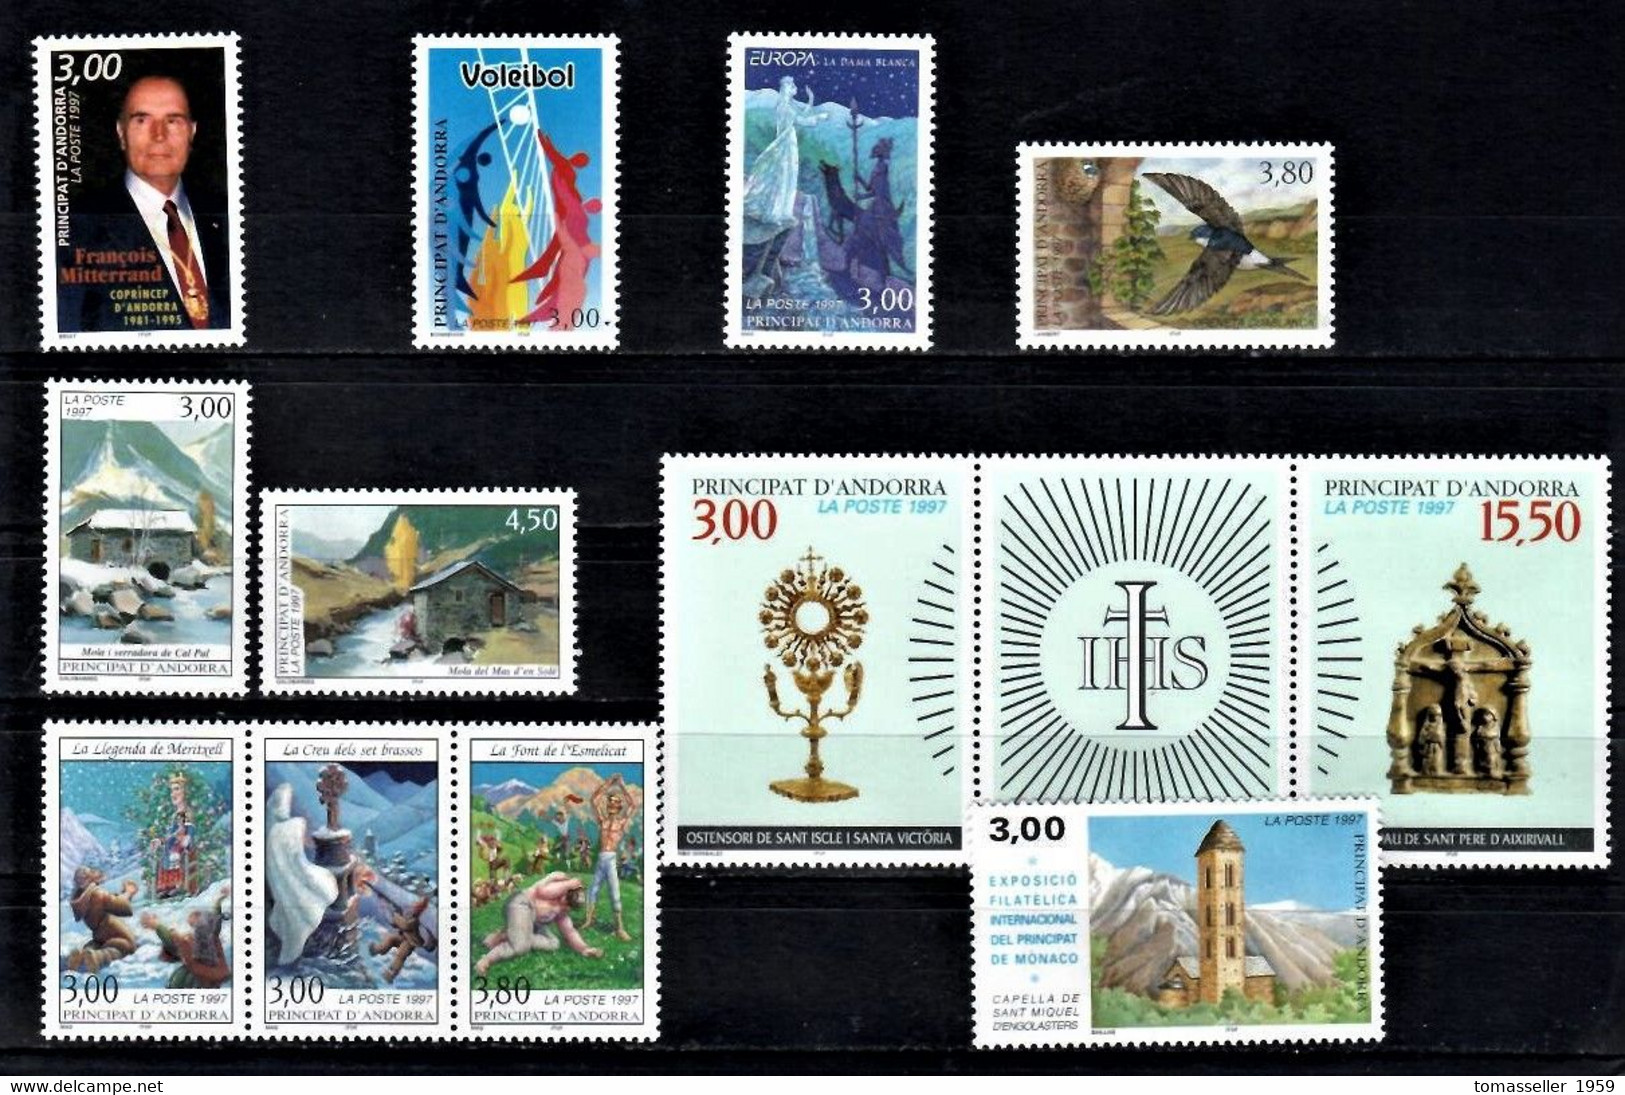 French Andorra 15!!! Years (1993-2007) sets.Almost 150 issues.MNH